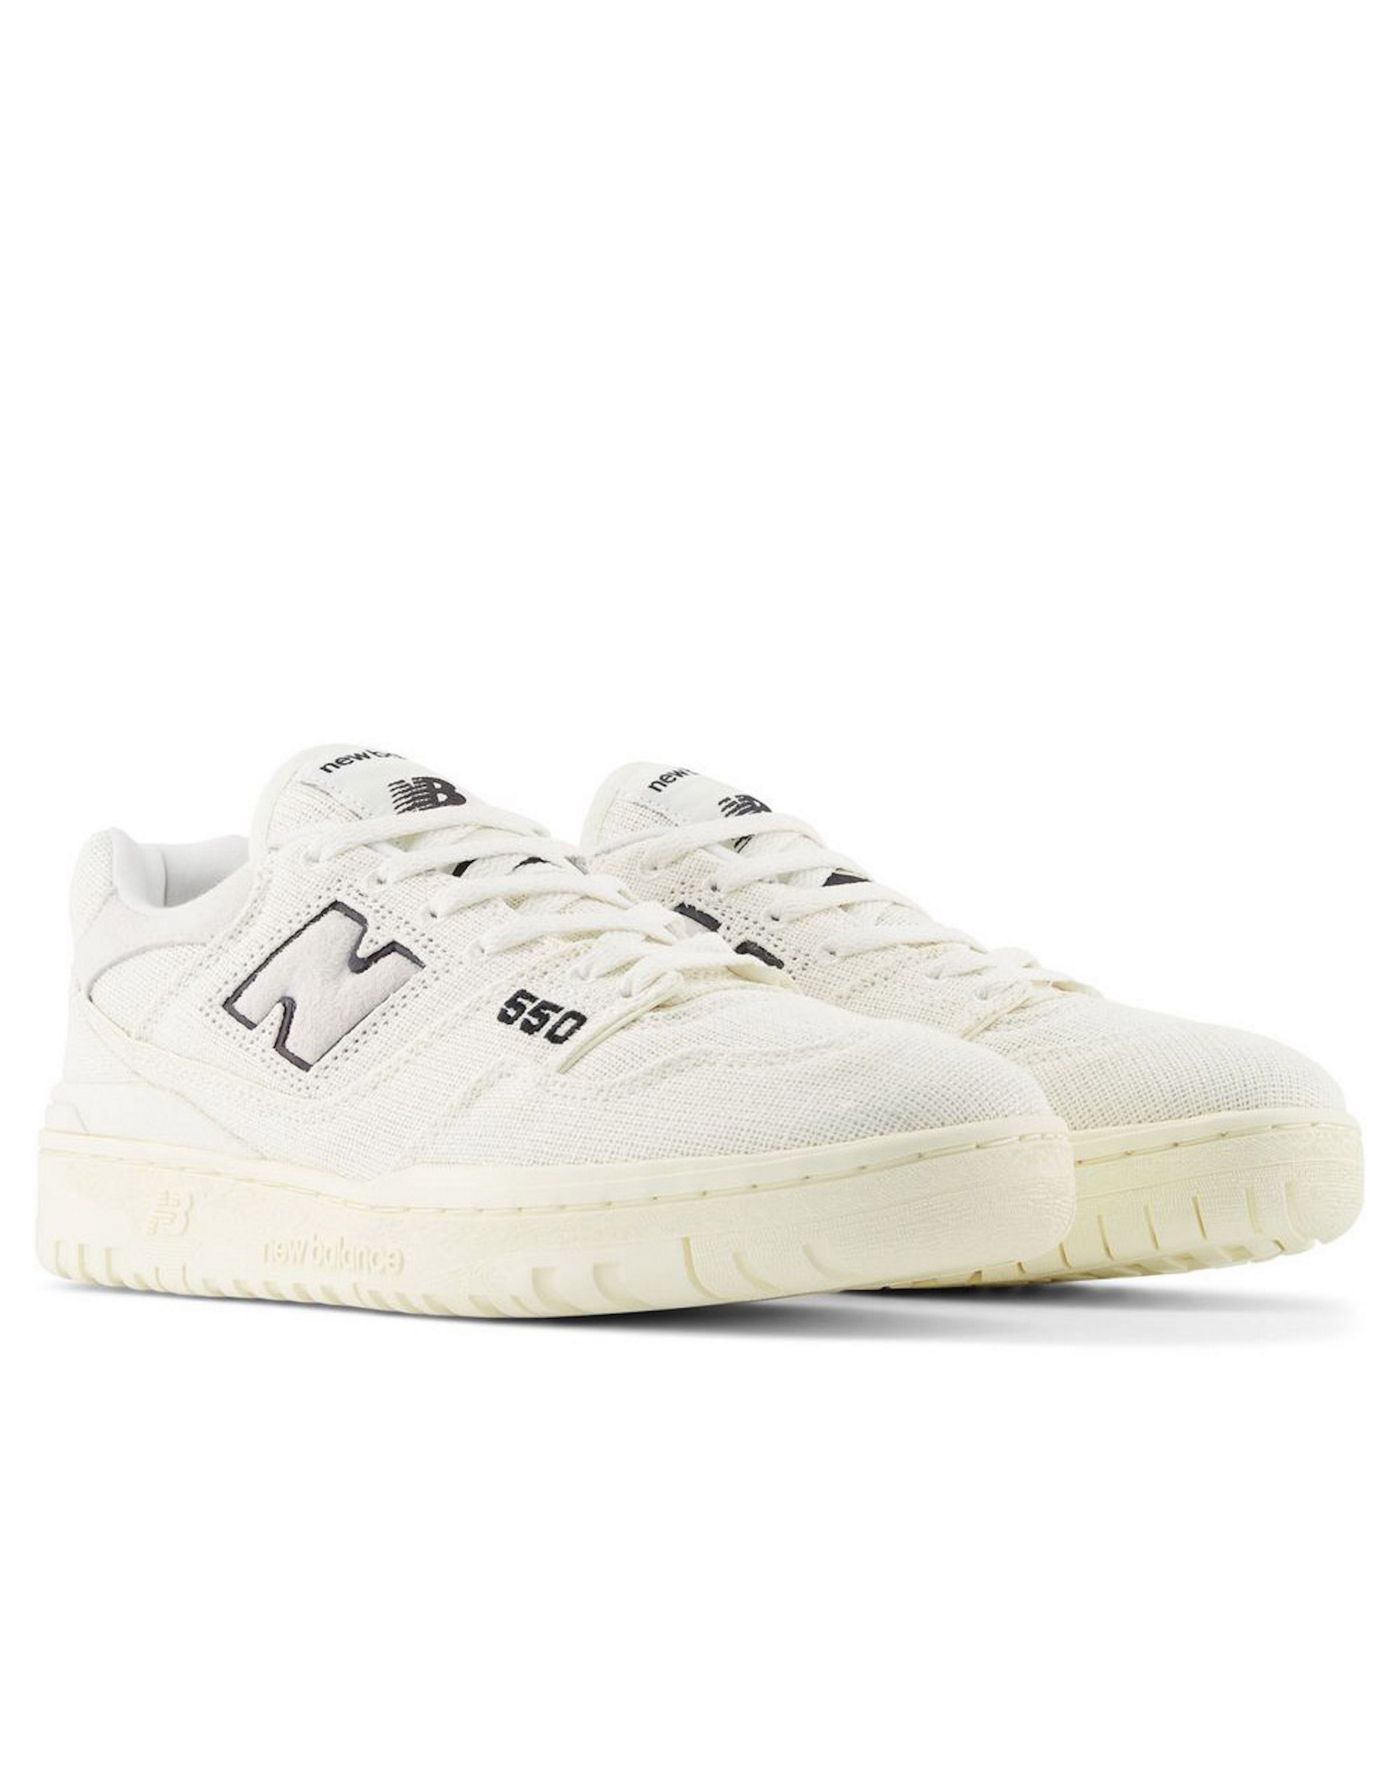 New Balance 550 trainers in white